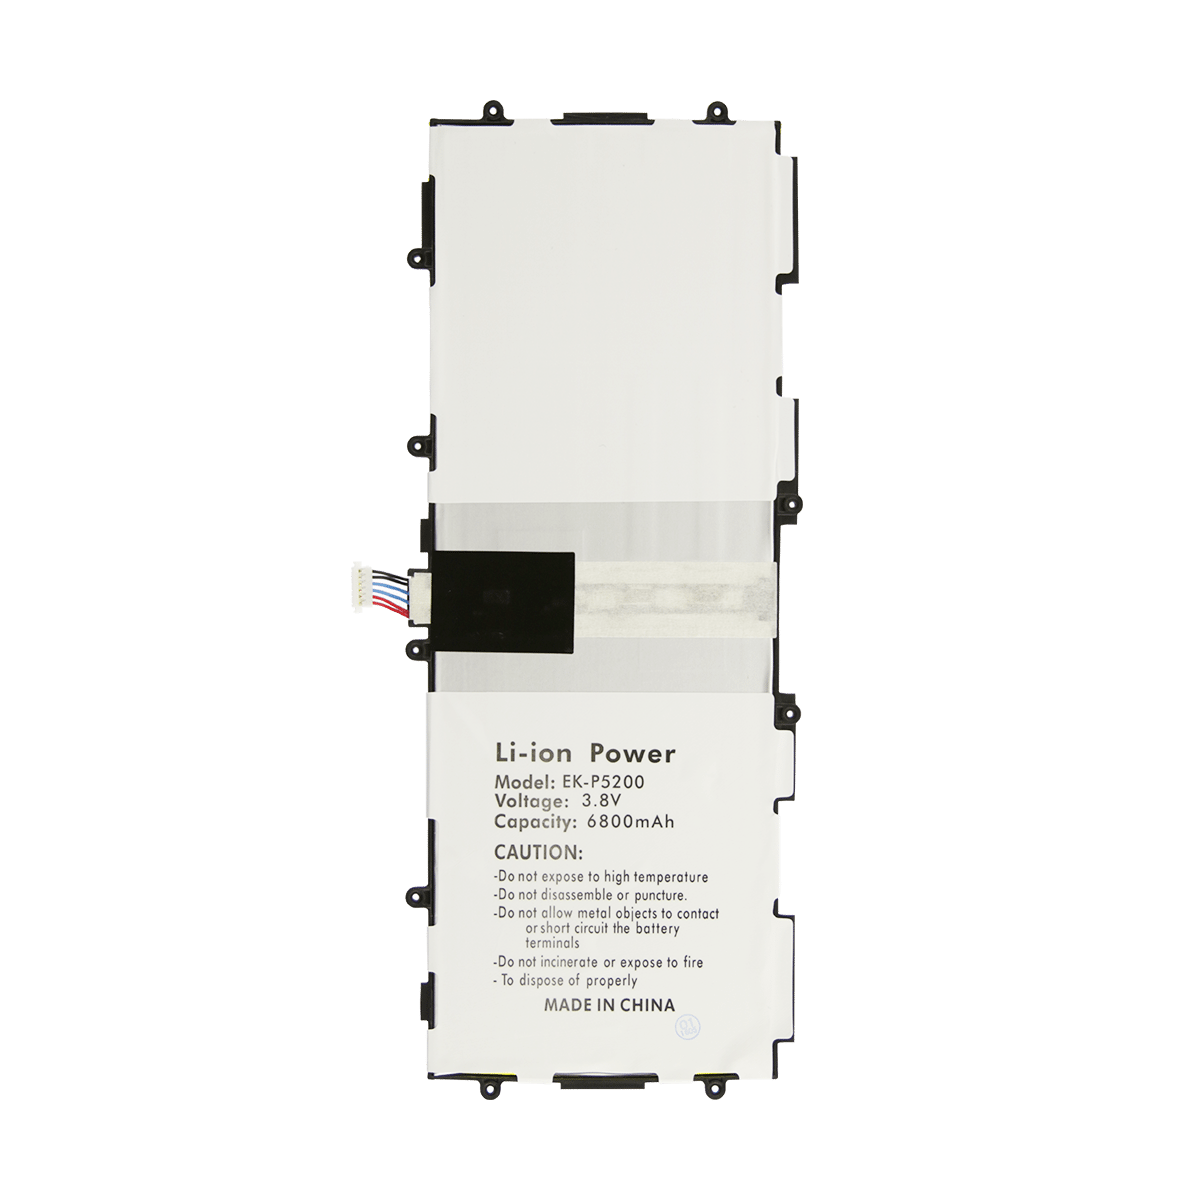 Samsung Galaxy Tab 3 10.1 P5210 Battery Replacement